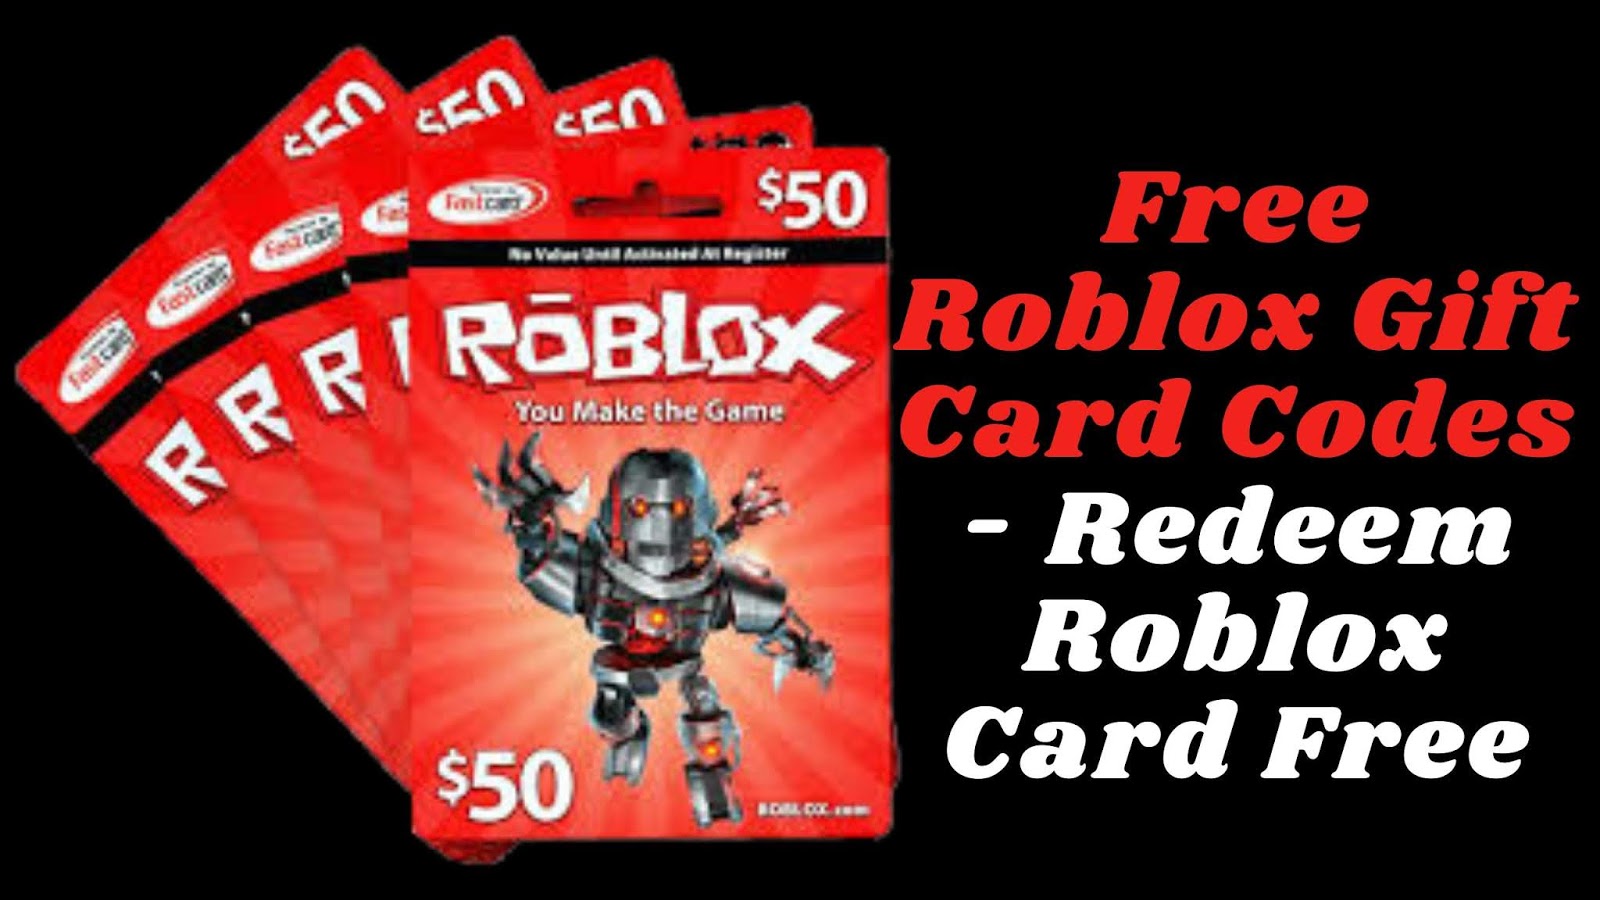 Free Gift Cards Free Roblox Gift Card Codes Redeem Roblox Card Free - free roblox images